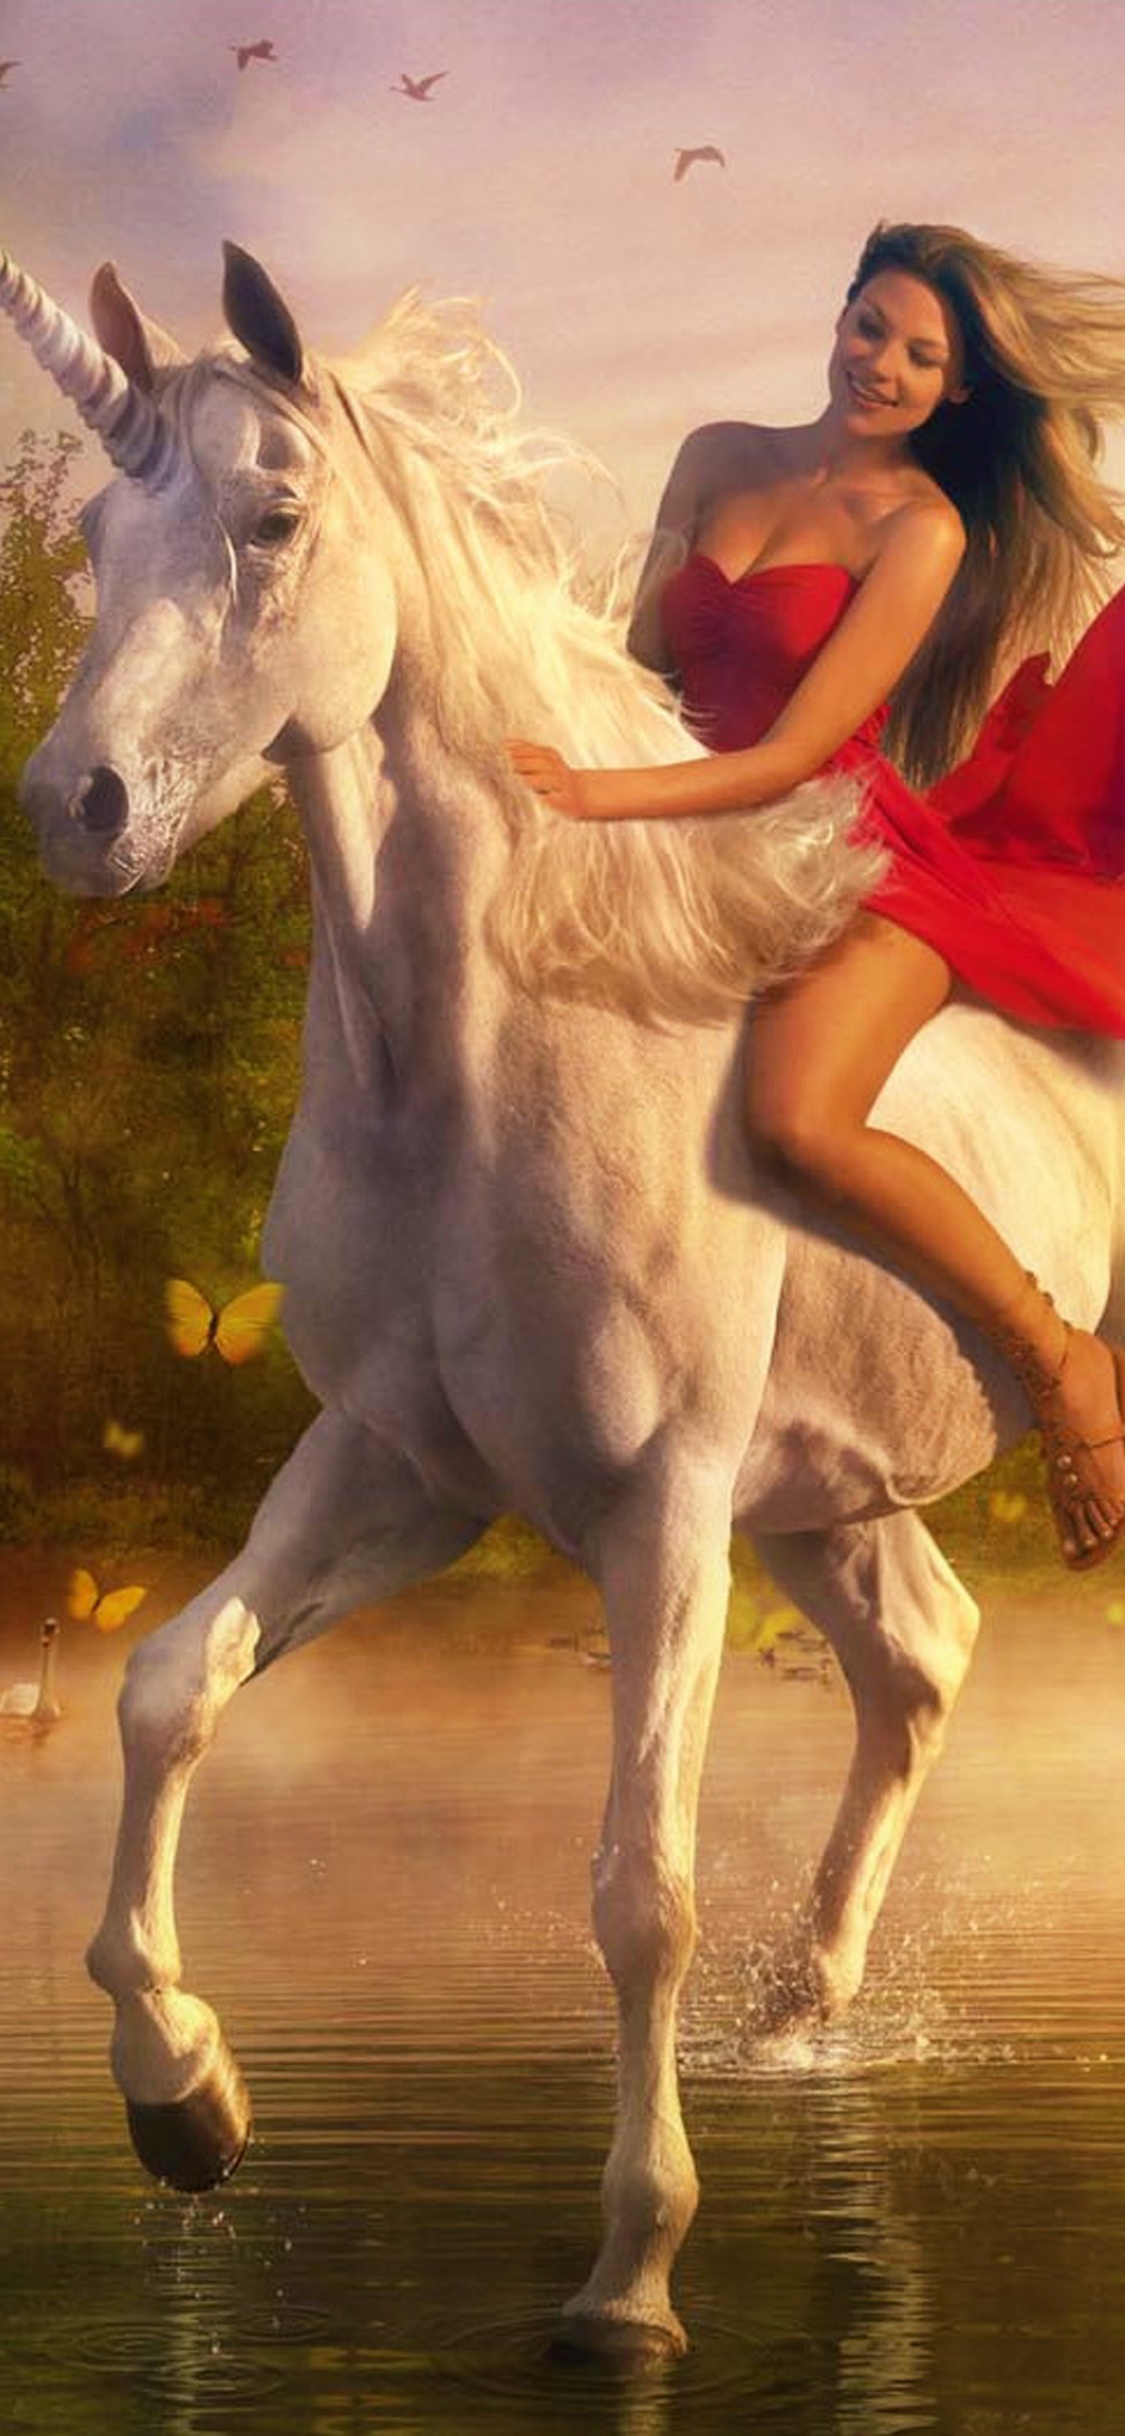 Woman in Red Dress Riding White Horse on Water. Wallpaper in 1125x2436 Resolution